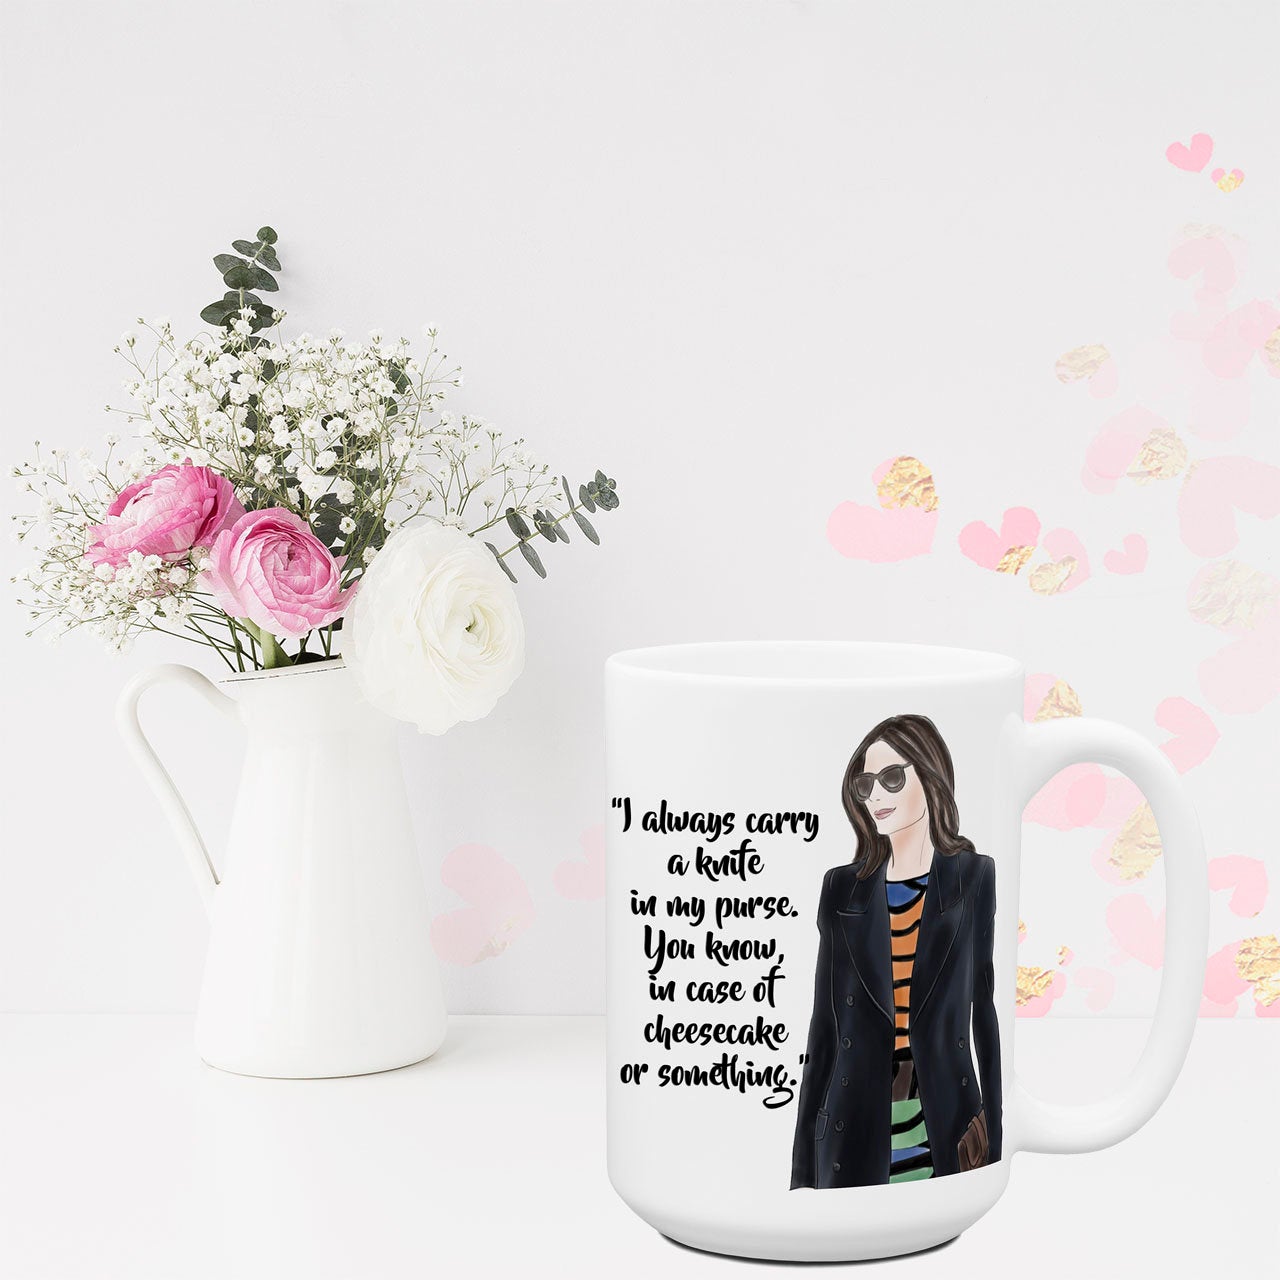 I Always Carry A Knife Funny Coffee Mugs for Women Sassy Attitude Coworker Work Friend Gift for Her